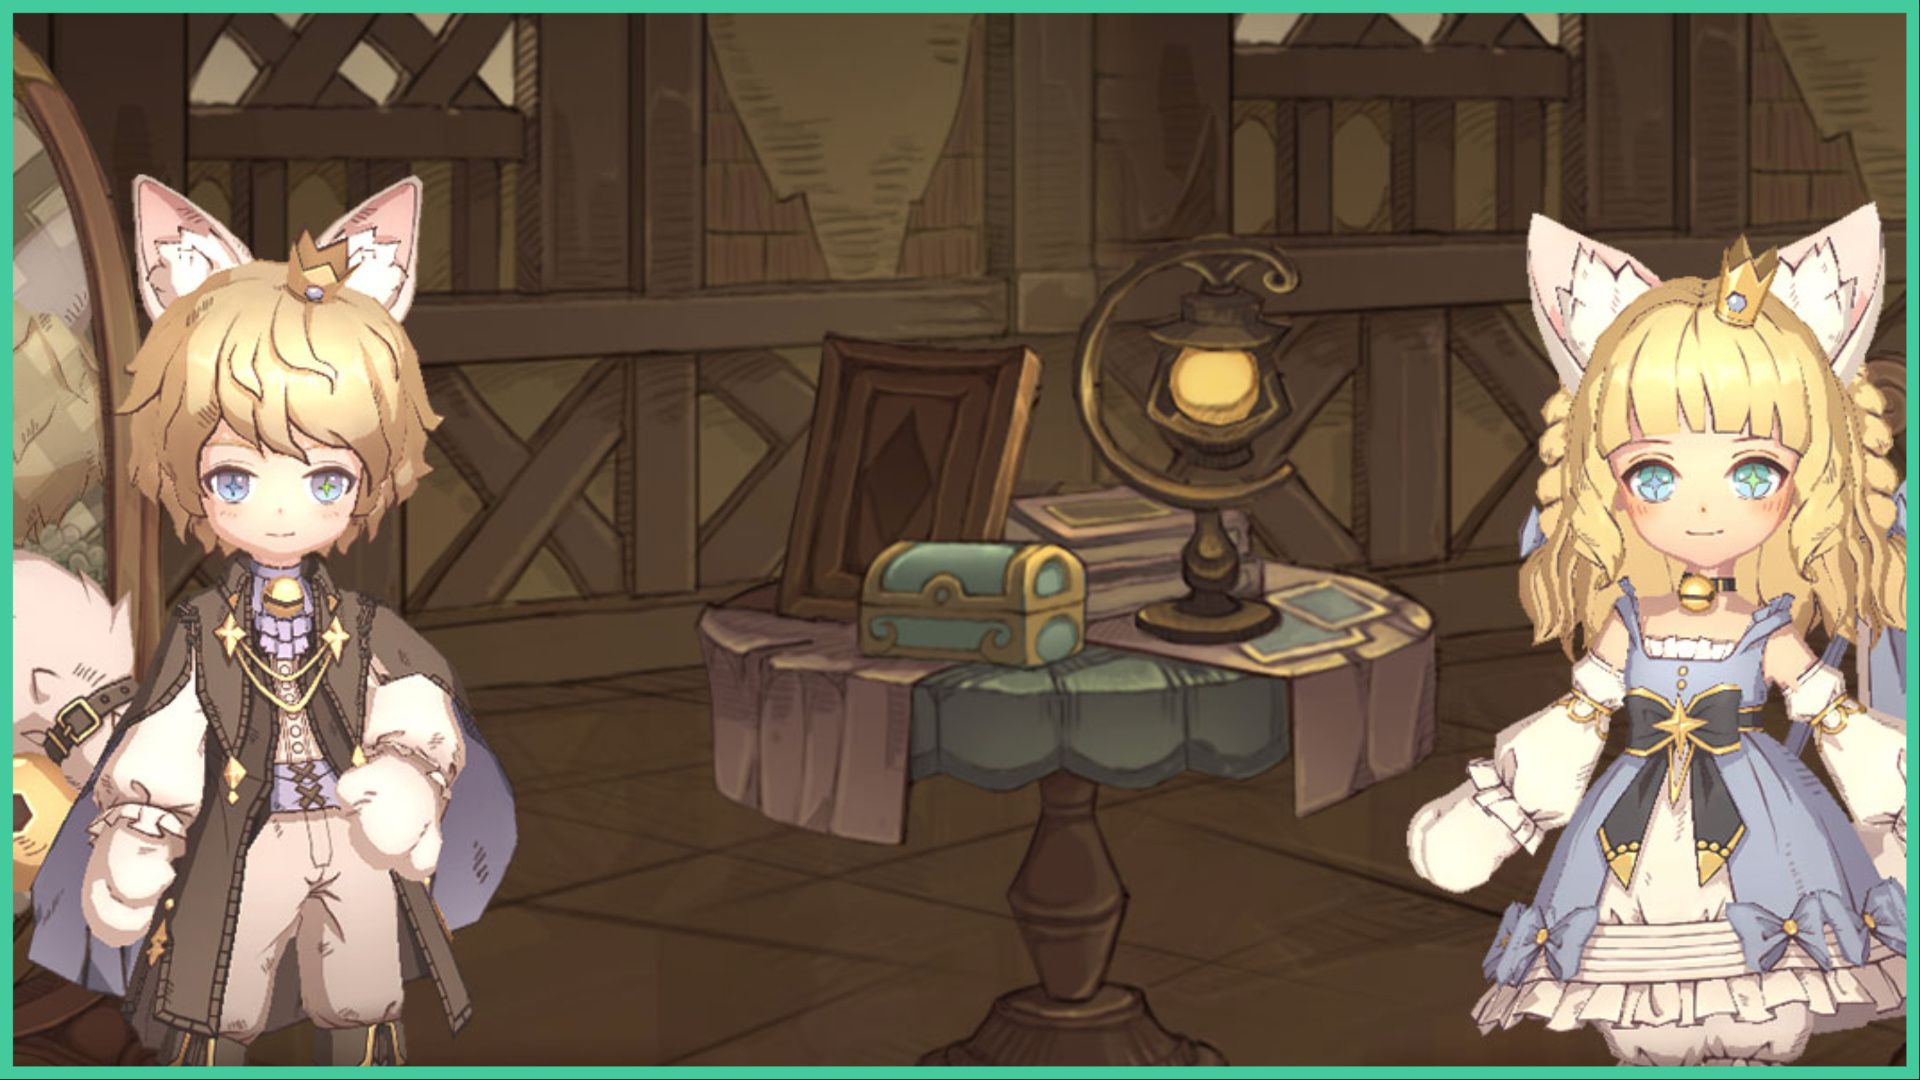 feautre image for our magic chronicle codes guide, the image features a screenshot of the game with two chibi-style characters with animal ears, hands, and tails as they stand in a wooden old-style building, there is a table between them with a lamp, small treasure box and a picture frame